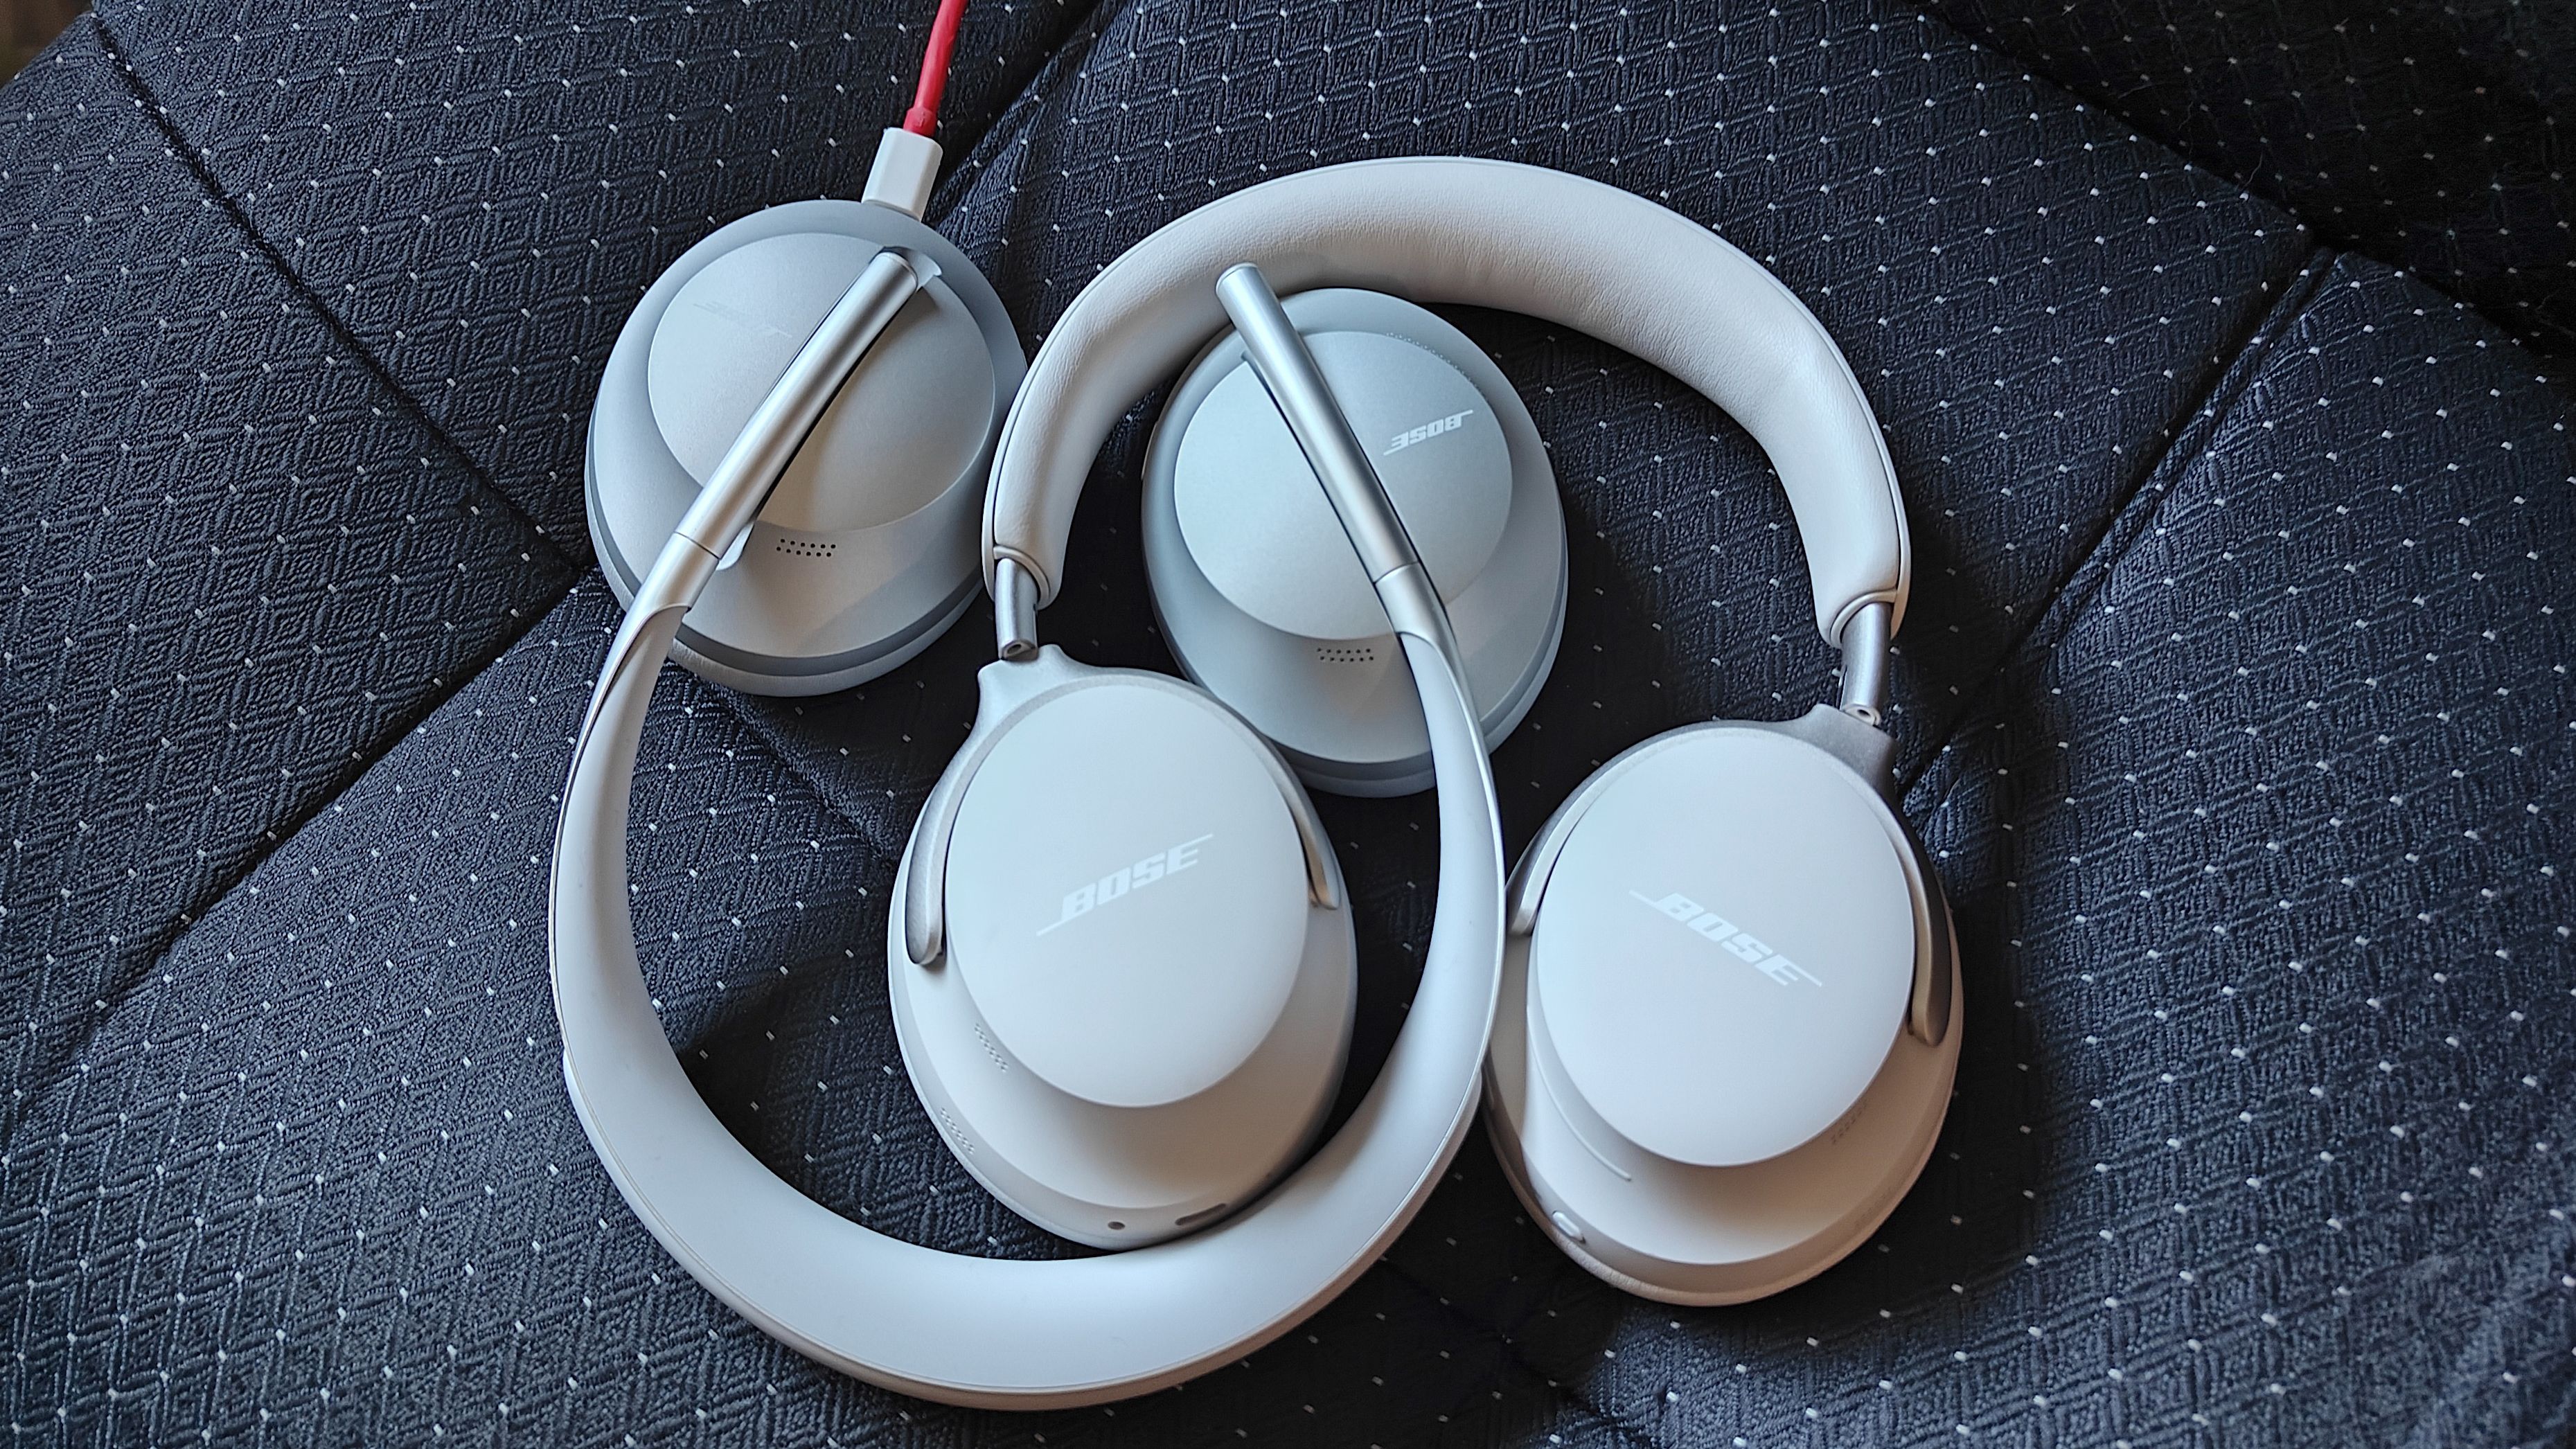 Bose 700 Noise Cancelling Wireless Over-Ear Headphones - Luxe Silver